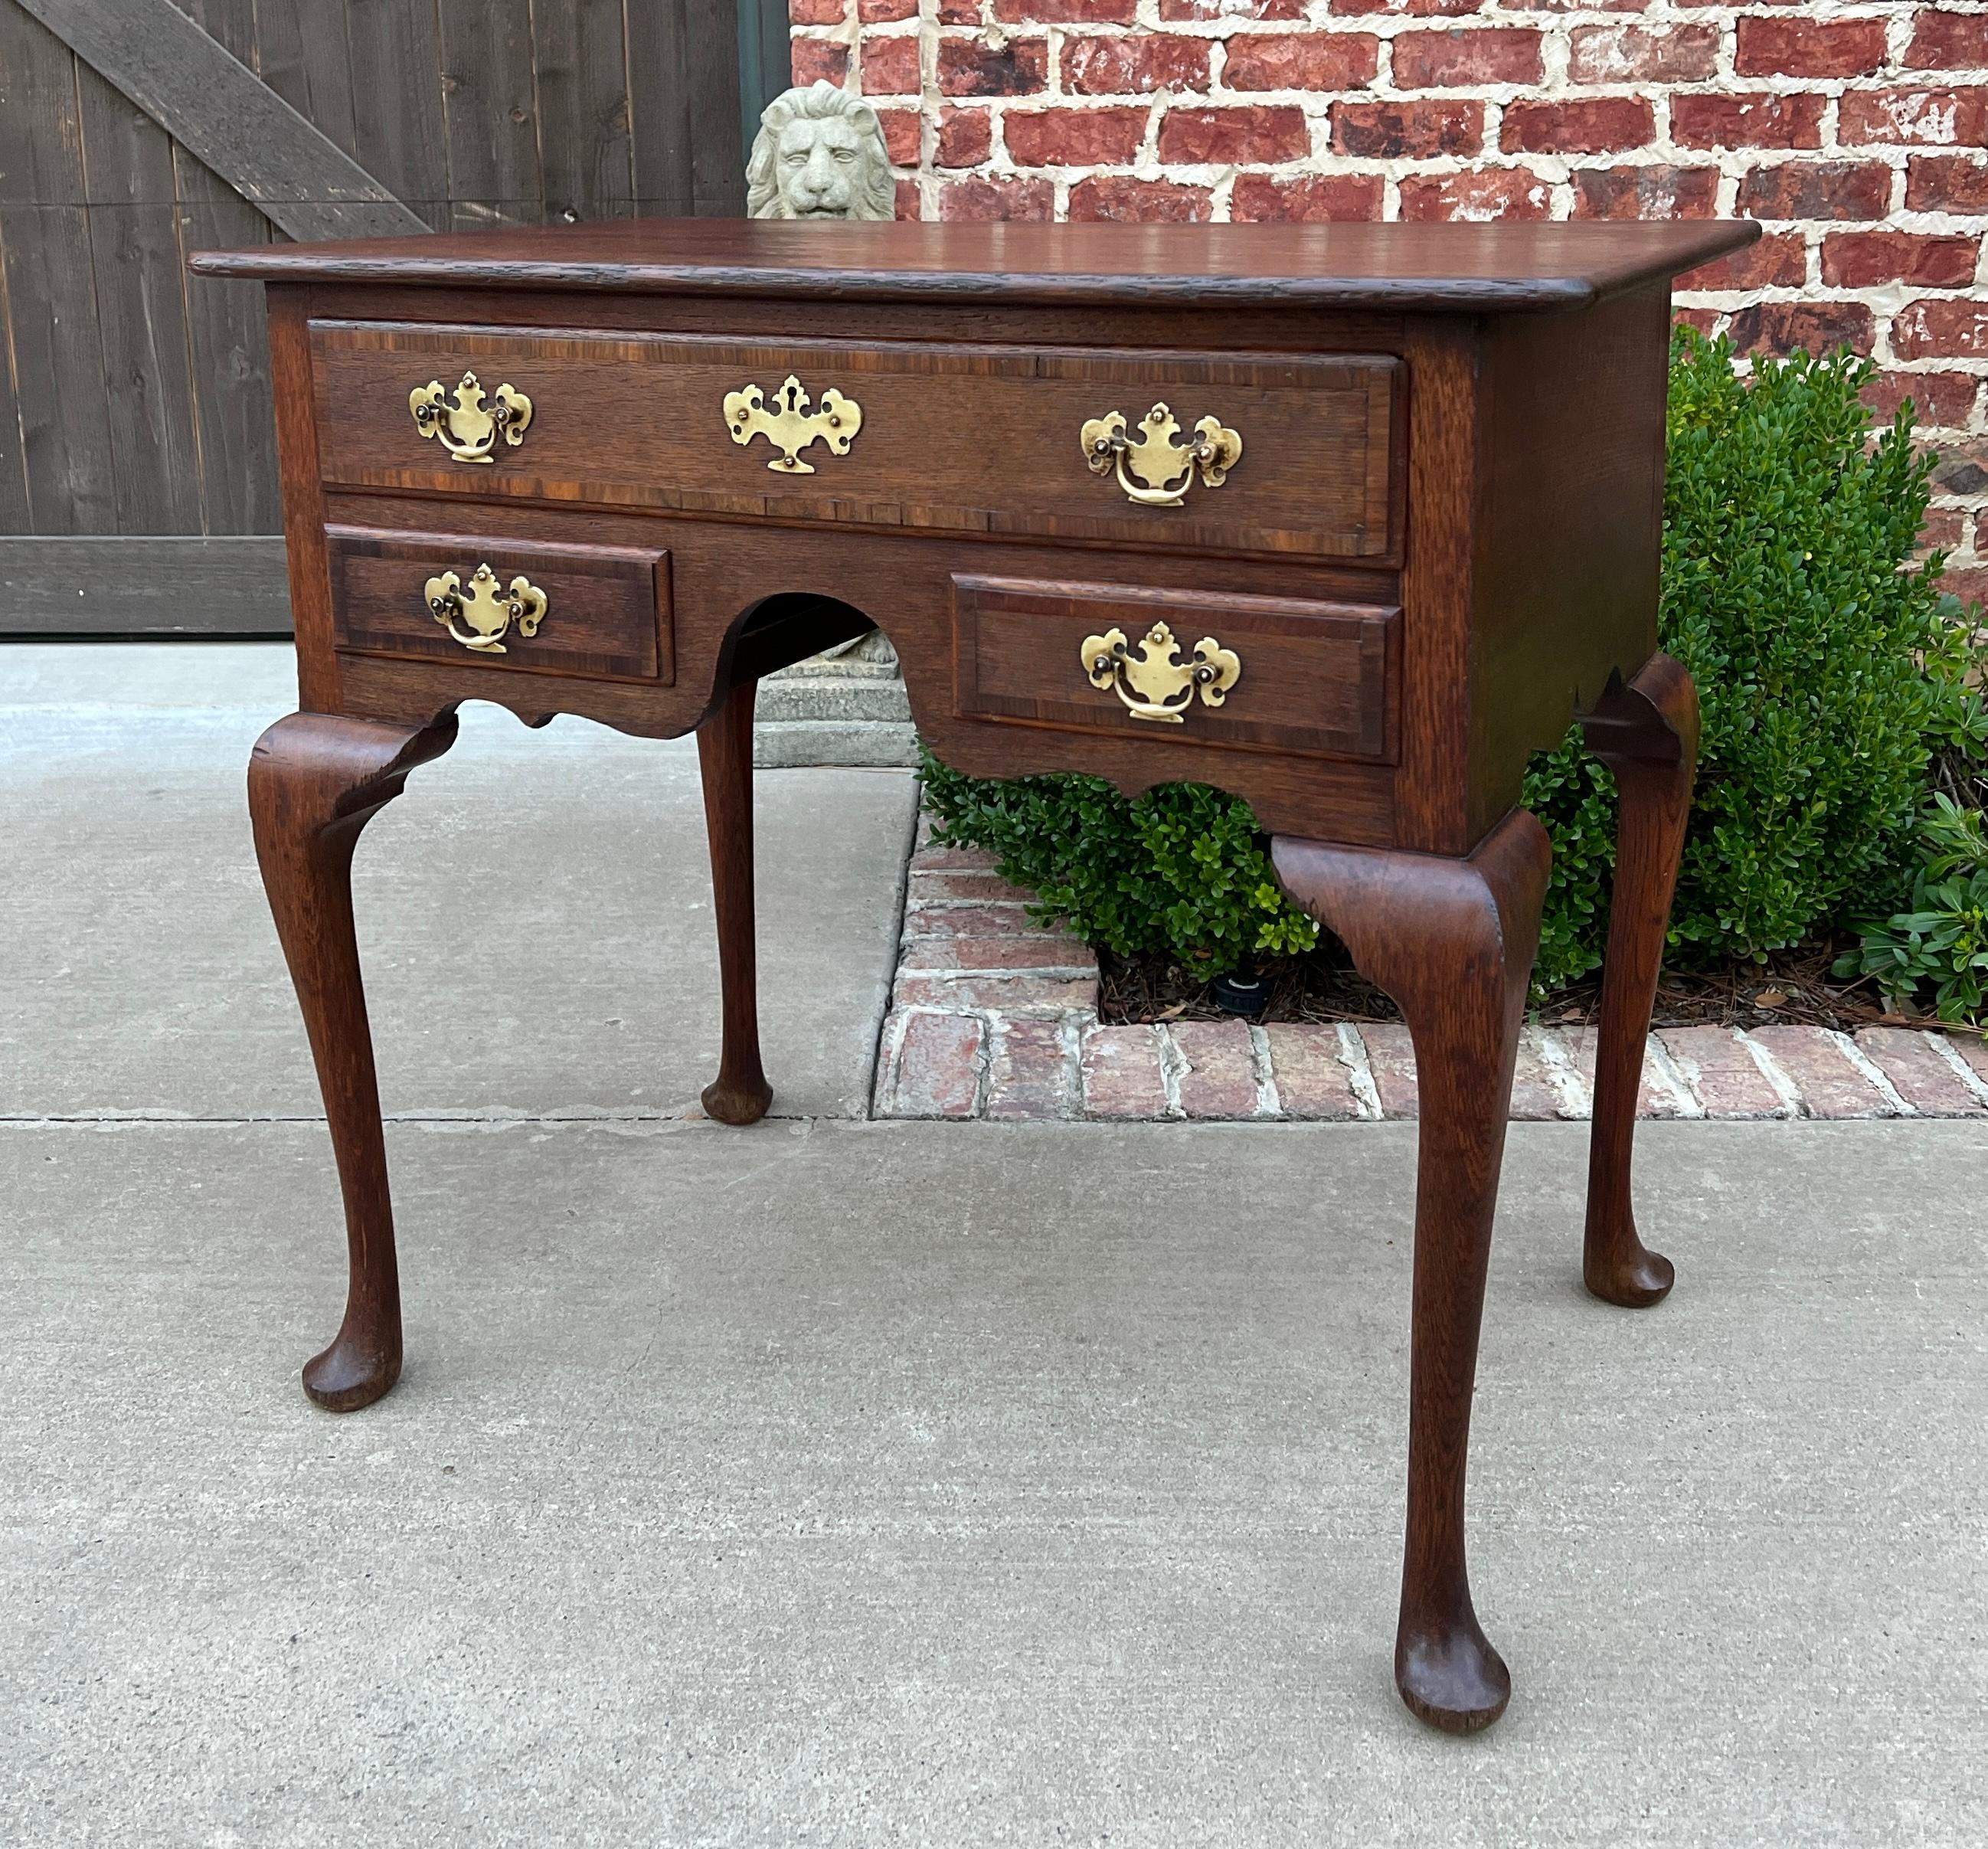 BEAUTIFUL  Antique English Tiger Oak Georgian Writing Desk, Table, Lowboy, or Nightstand with Drawers~~c. early 19th Century


So versatile~~could be used as an end table or entry hall table, nightstand or small writing desk~~drawers with original